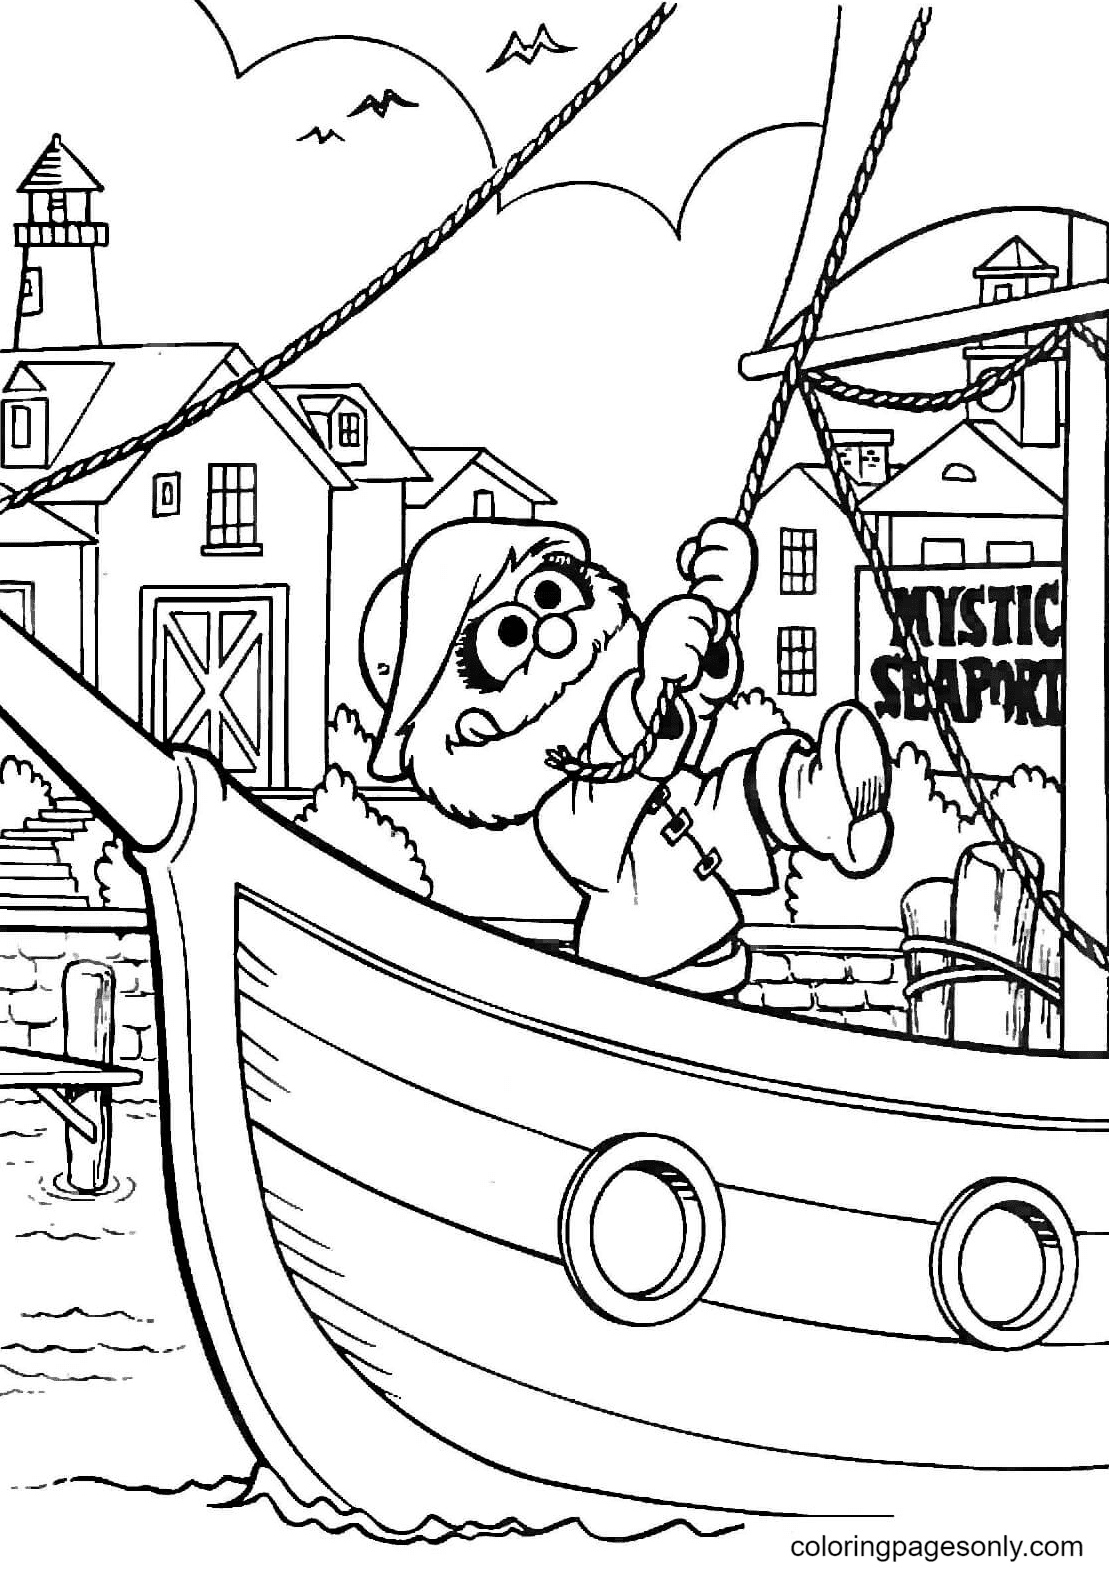 Animal on the boat at Mystic Seaport Coloring Page